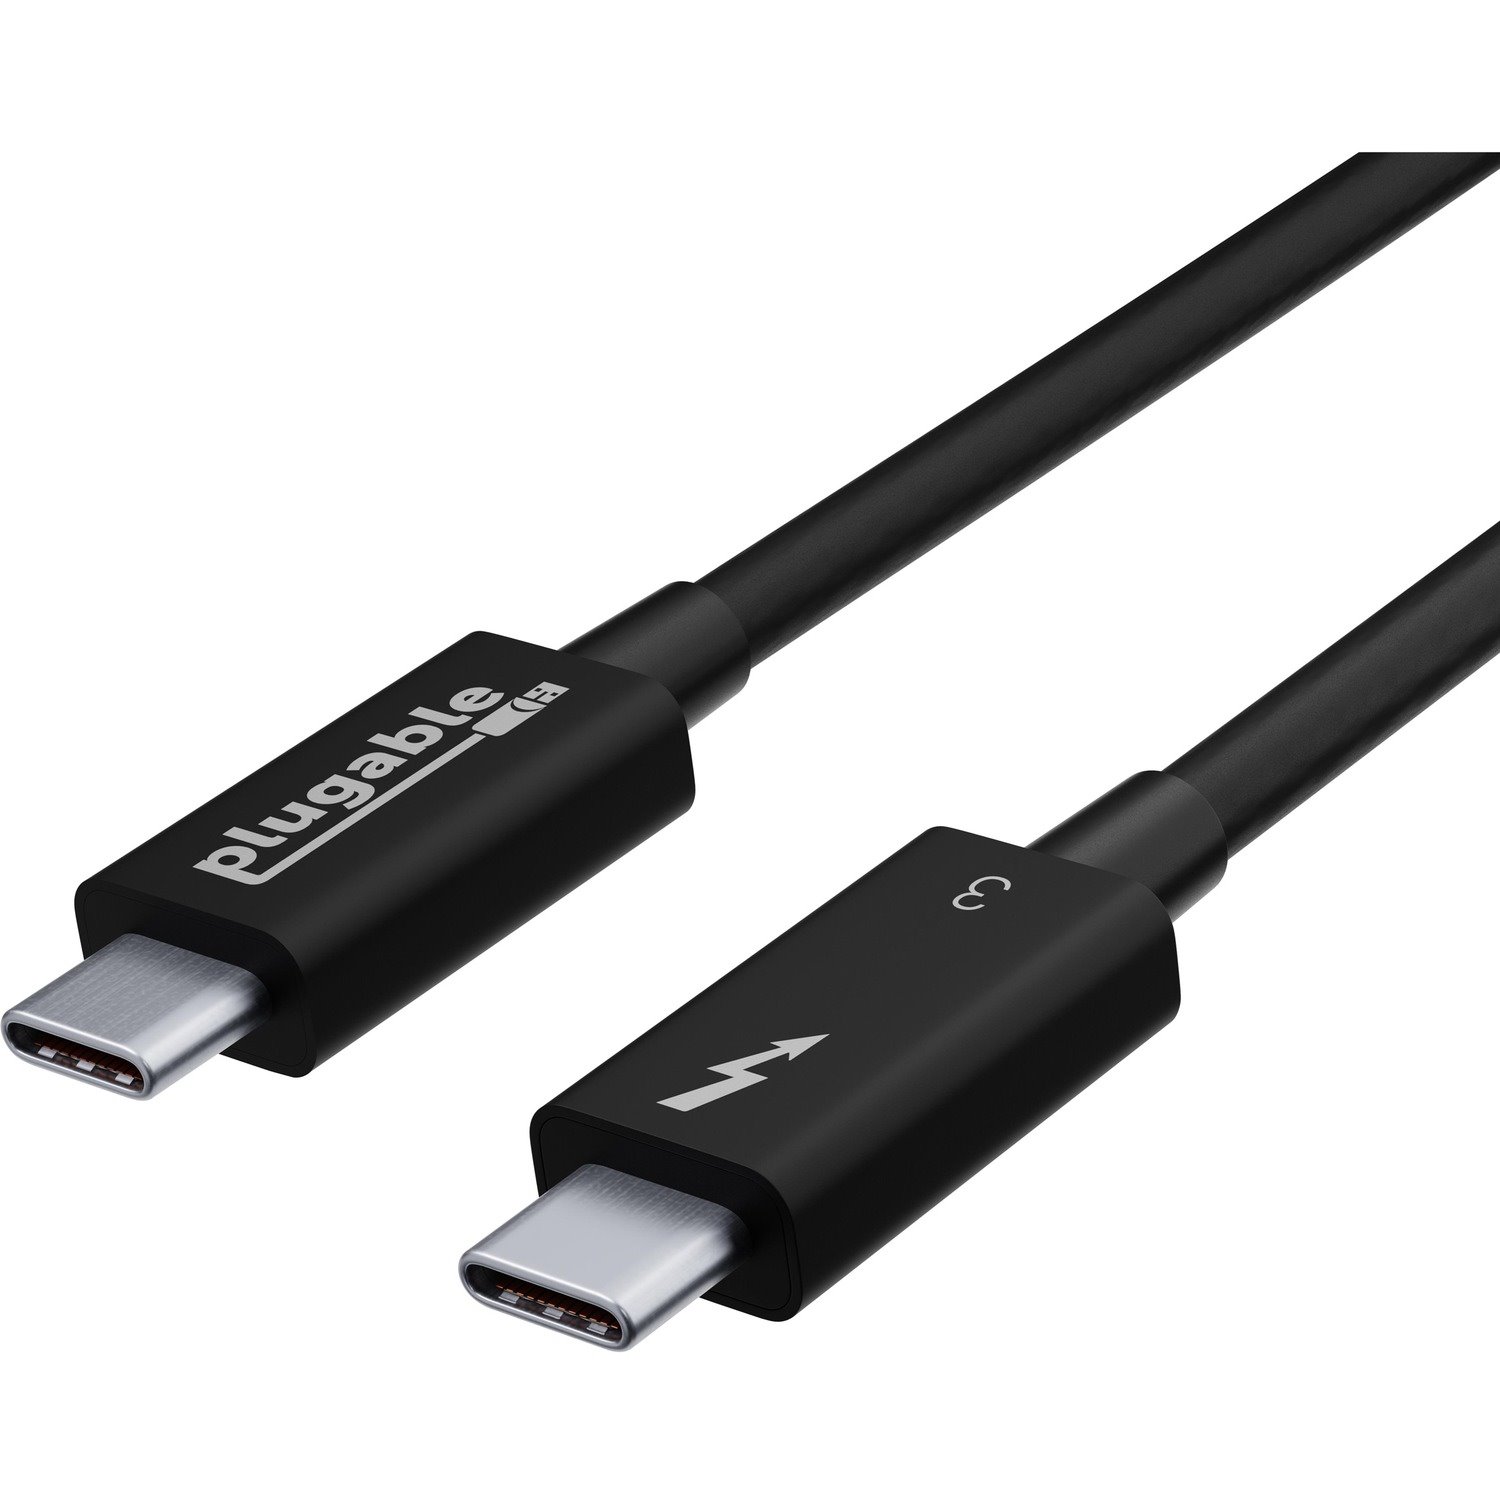 Plugable Thunderbolt 3 Cable 40Gbps Supports 60W (20V, 3A) Charging